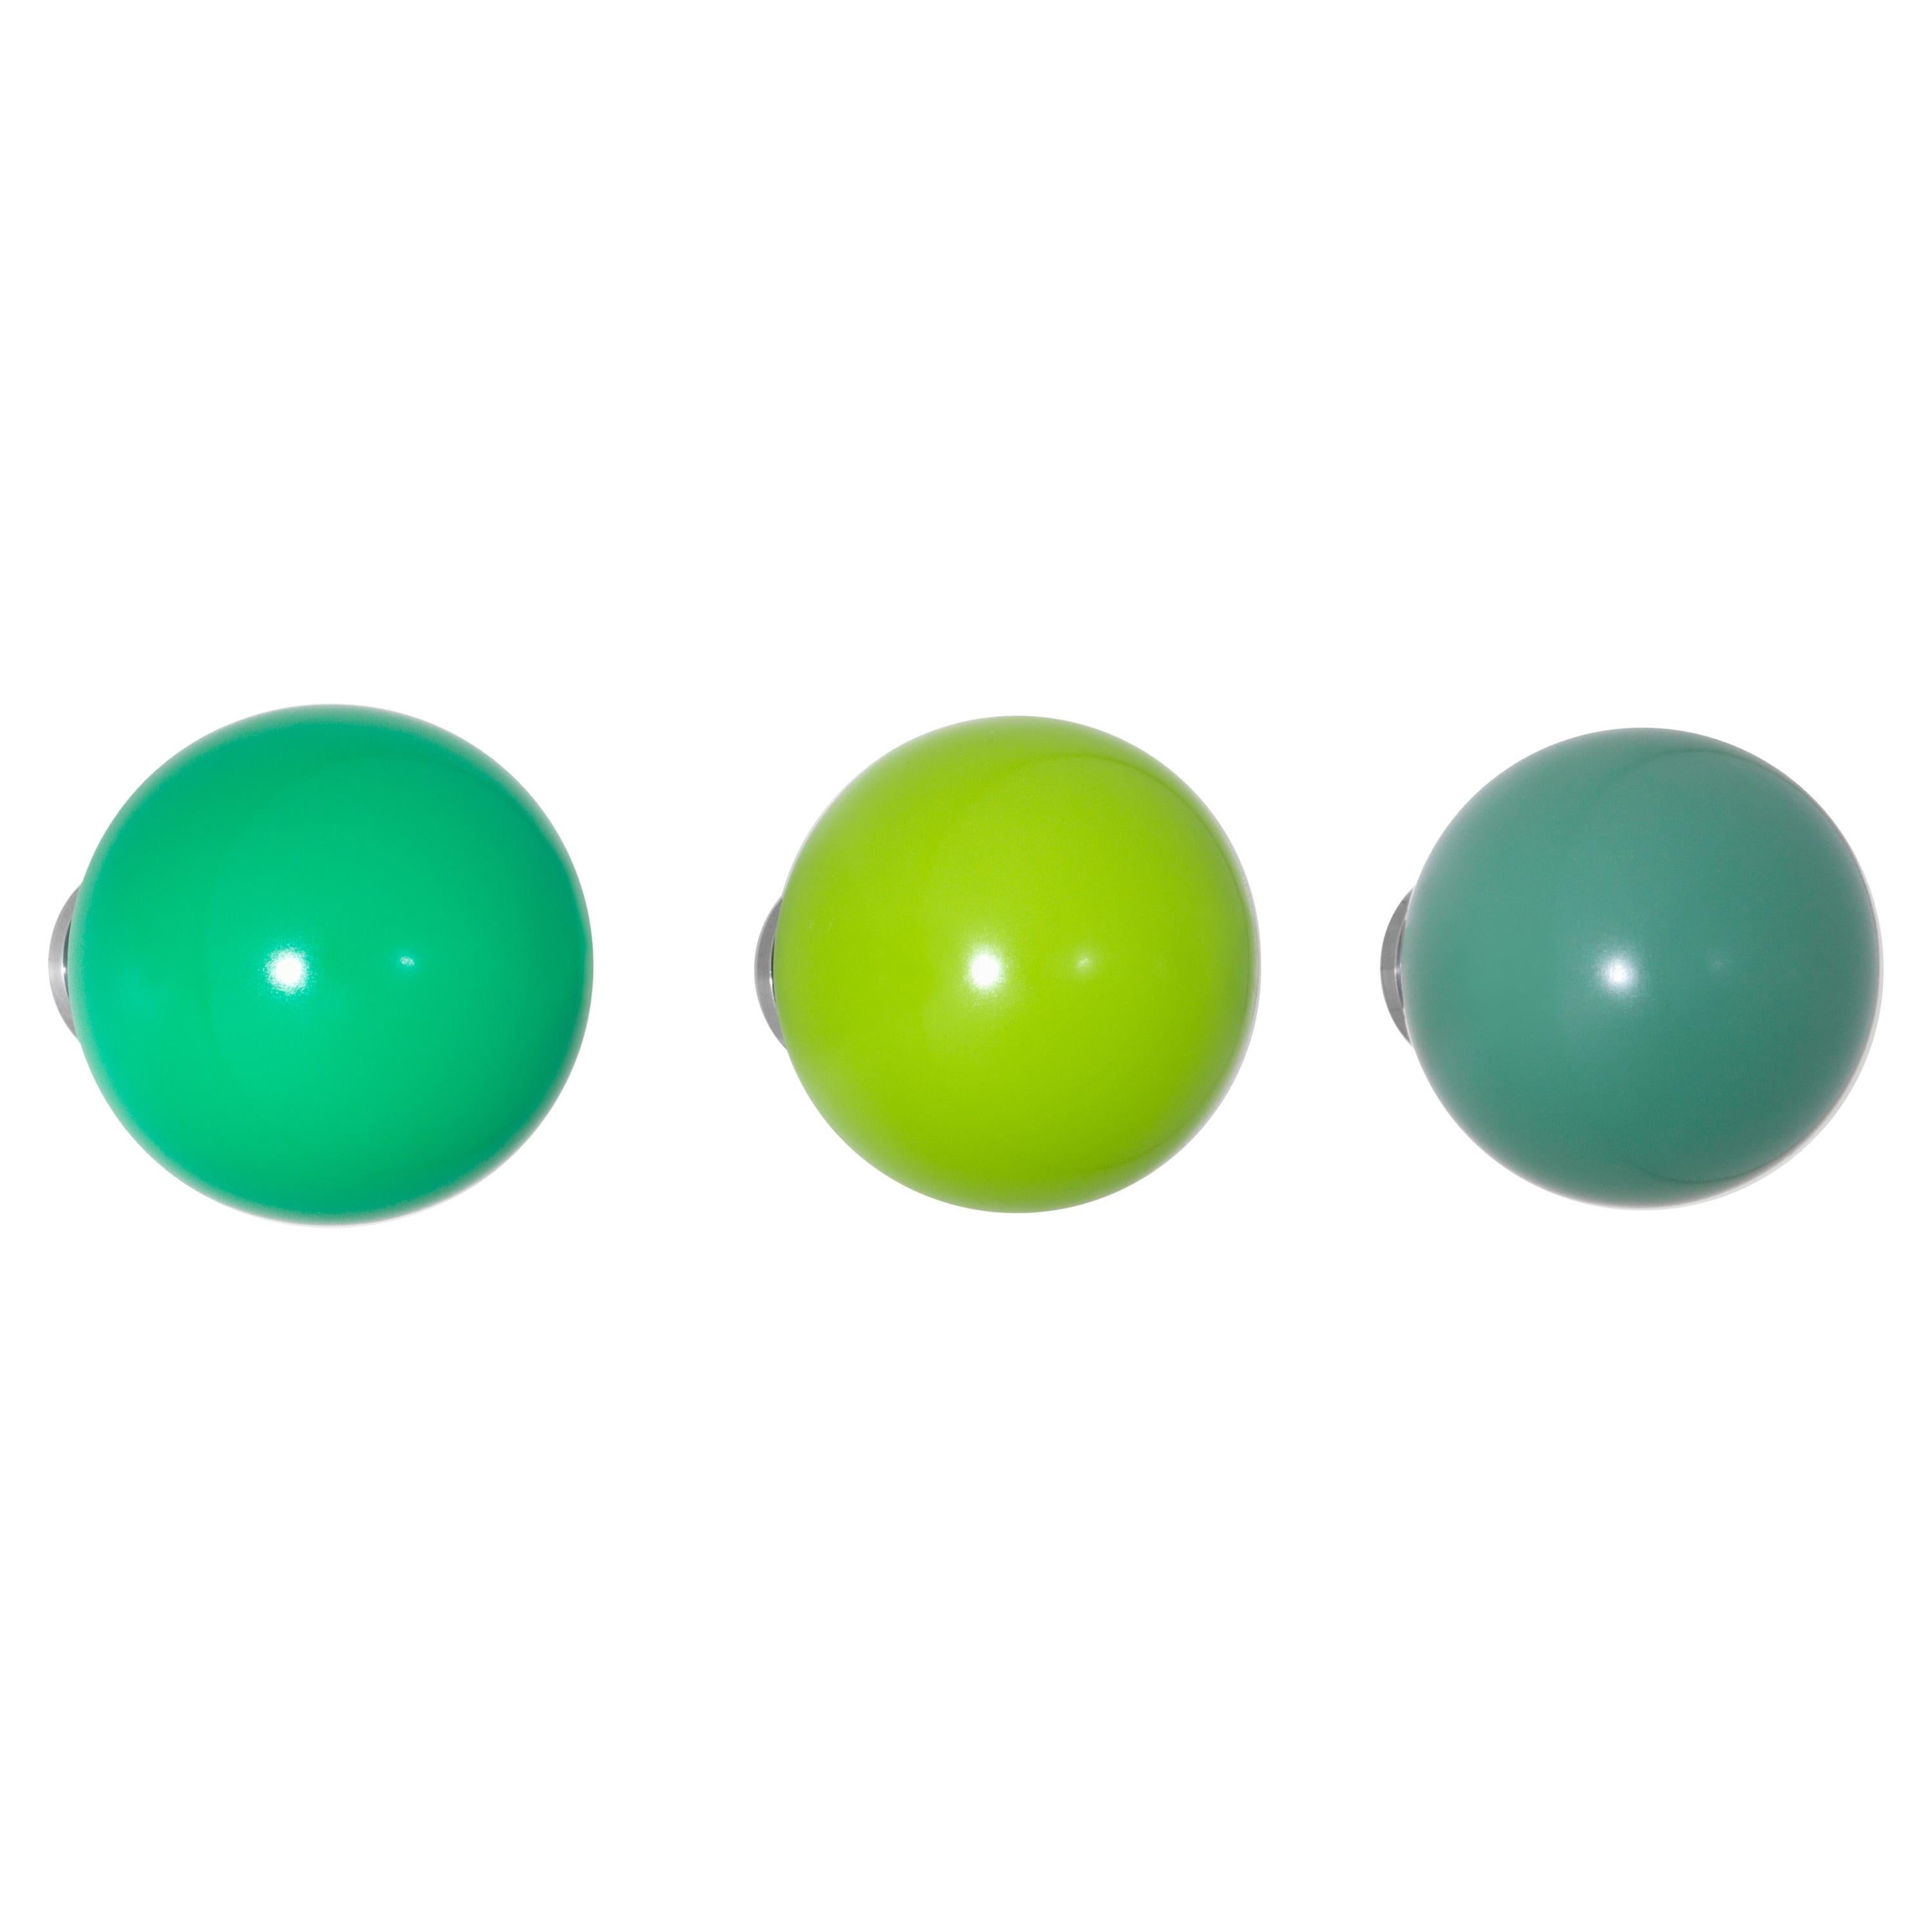 Vitra Coat Dots Set of 3 in Shades of Green by Hella Jongerius For Sale